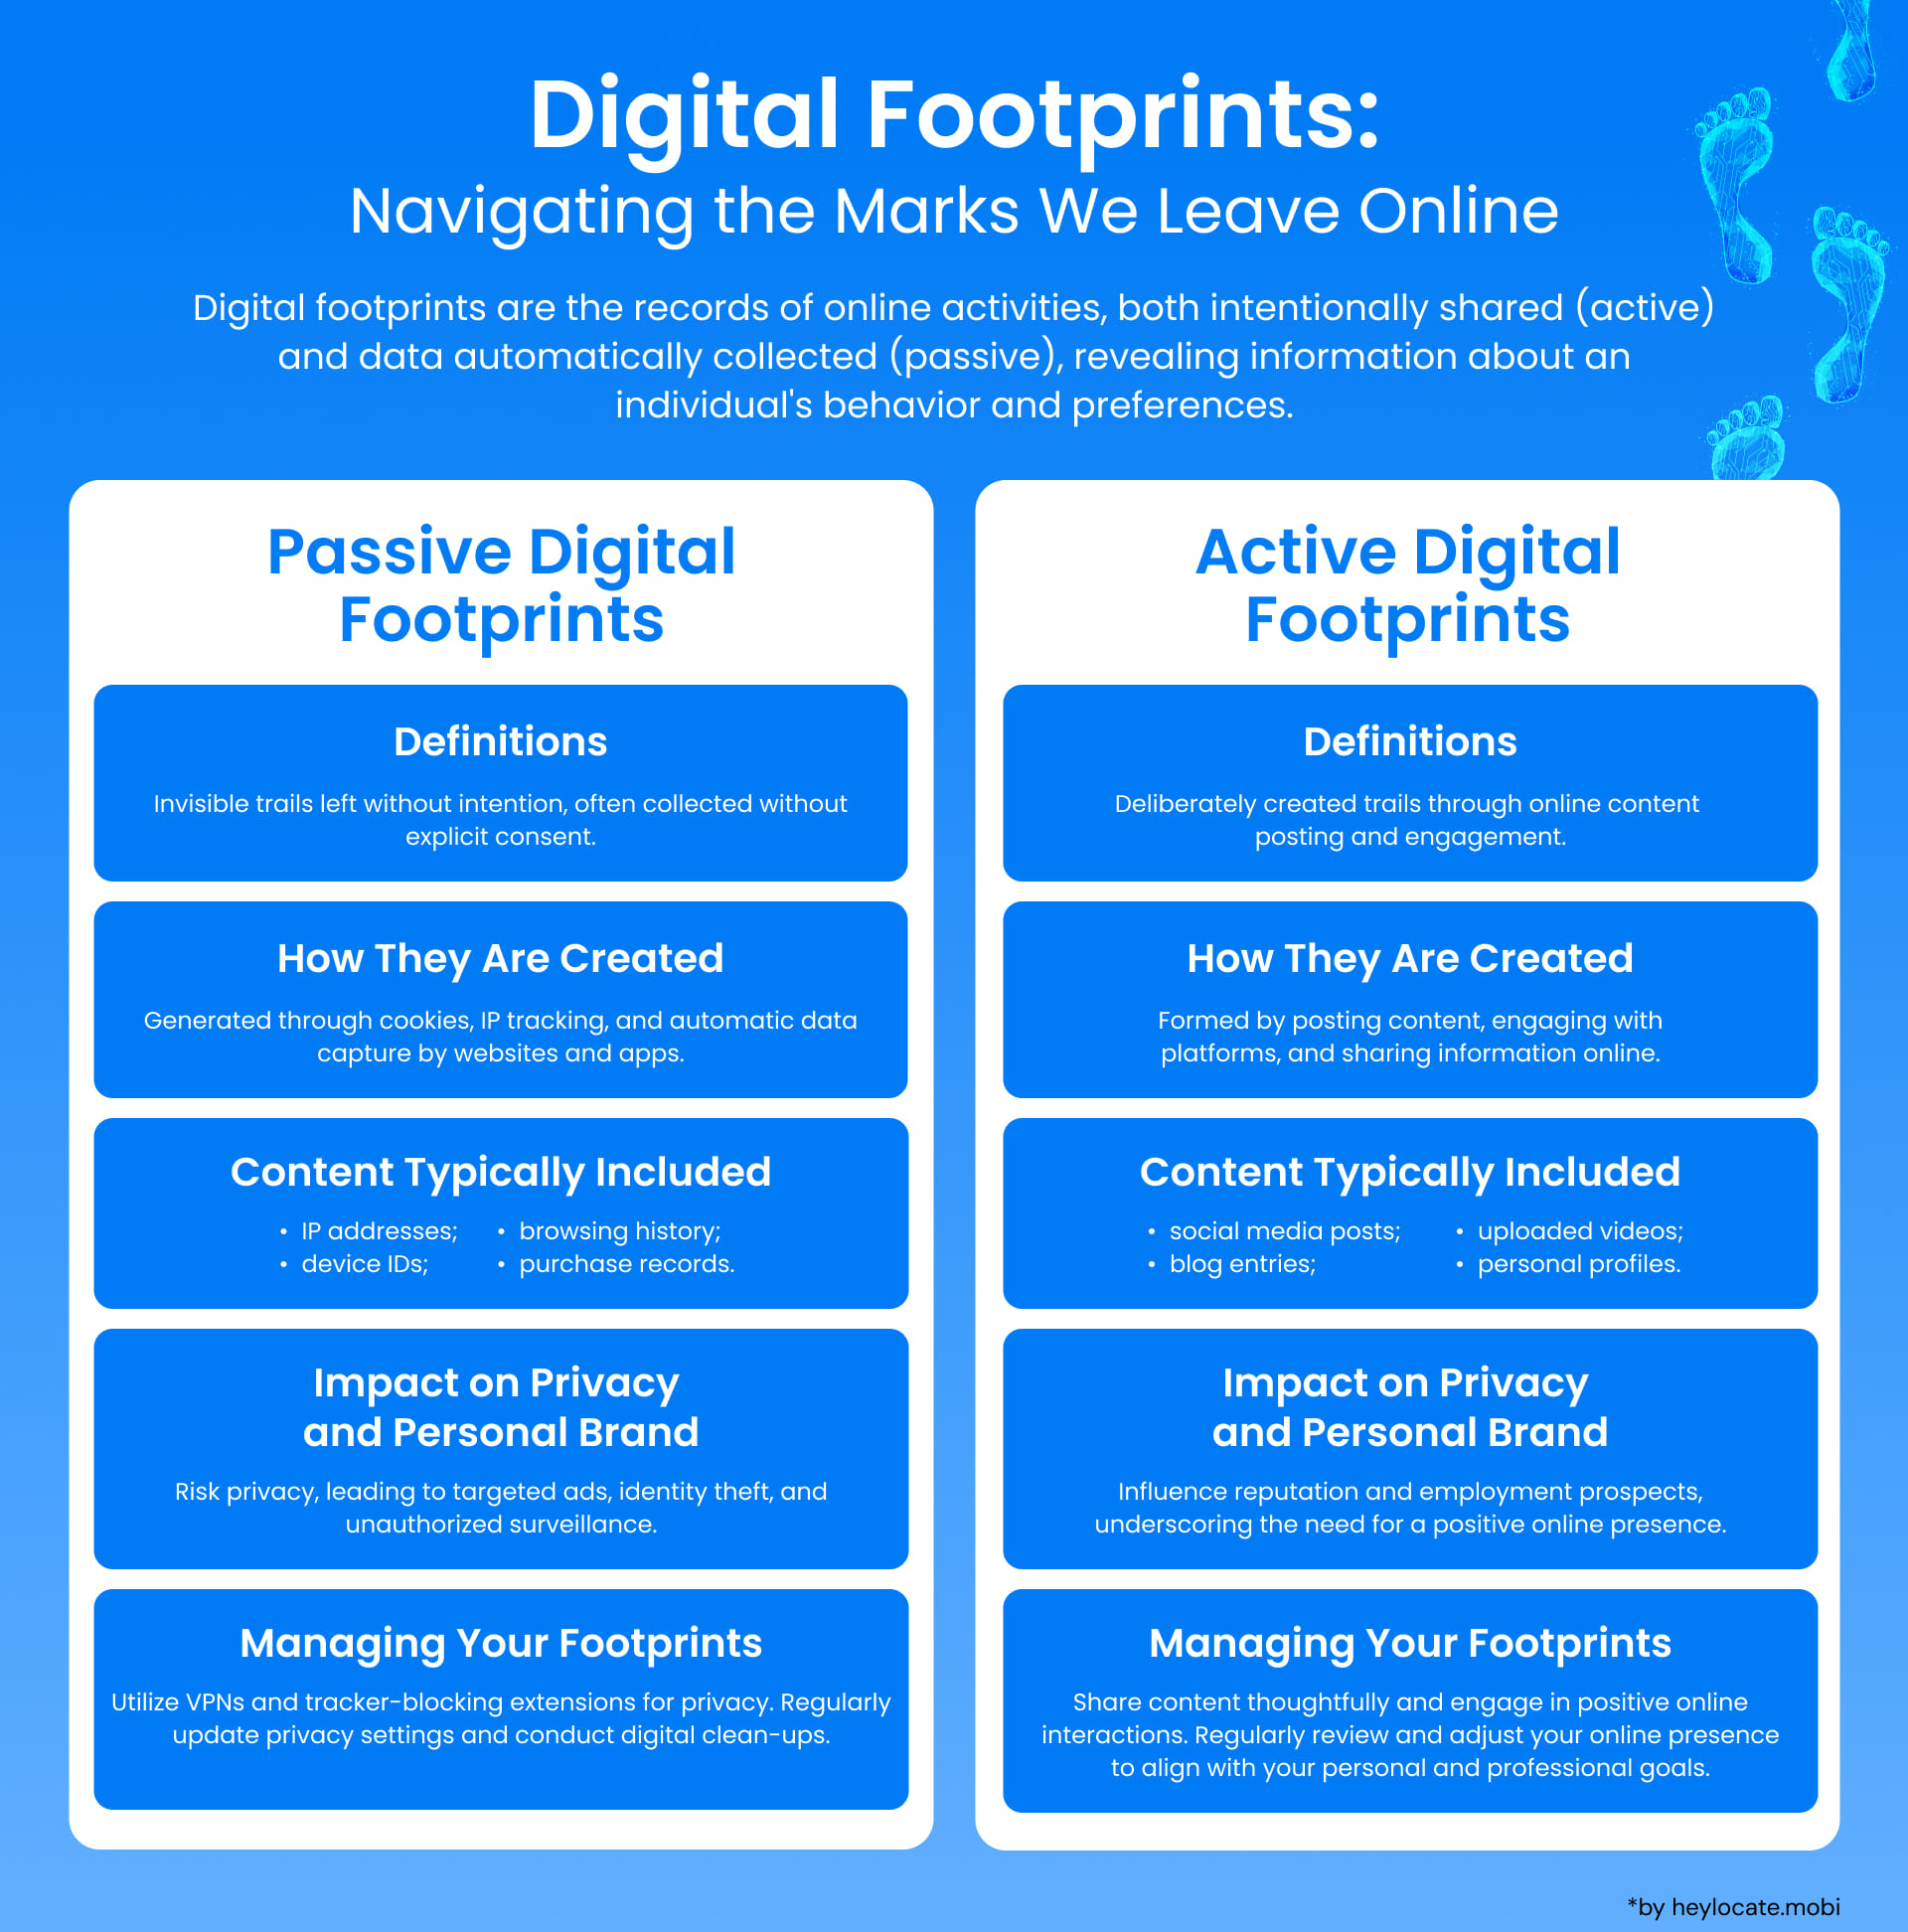 Infographic depicting the difference between passive and active digital footprints, including definitions, creation methods, typical content, and impacts on privacy